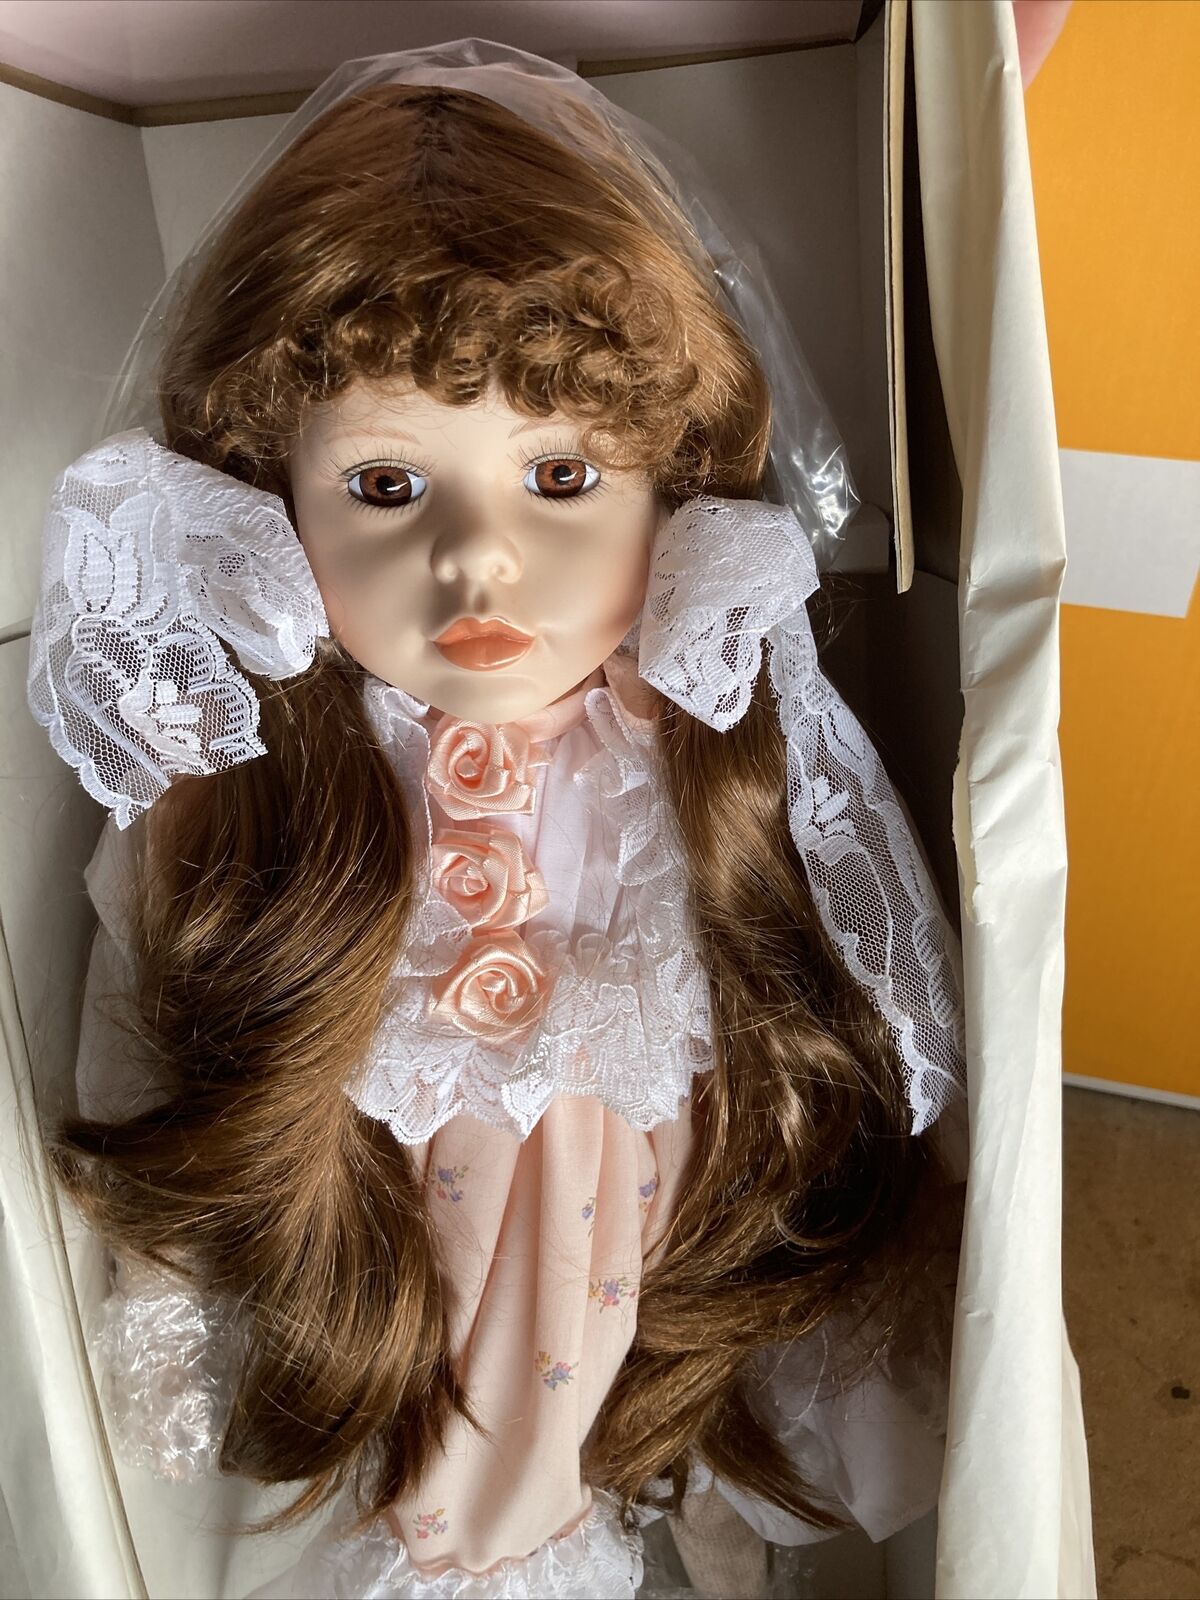 Doll World Of Victoria Collectibles Porcelain 21” Samantha Victor New In Box